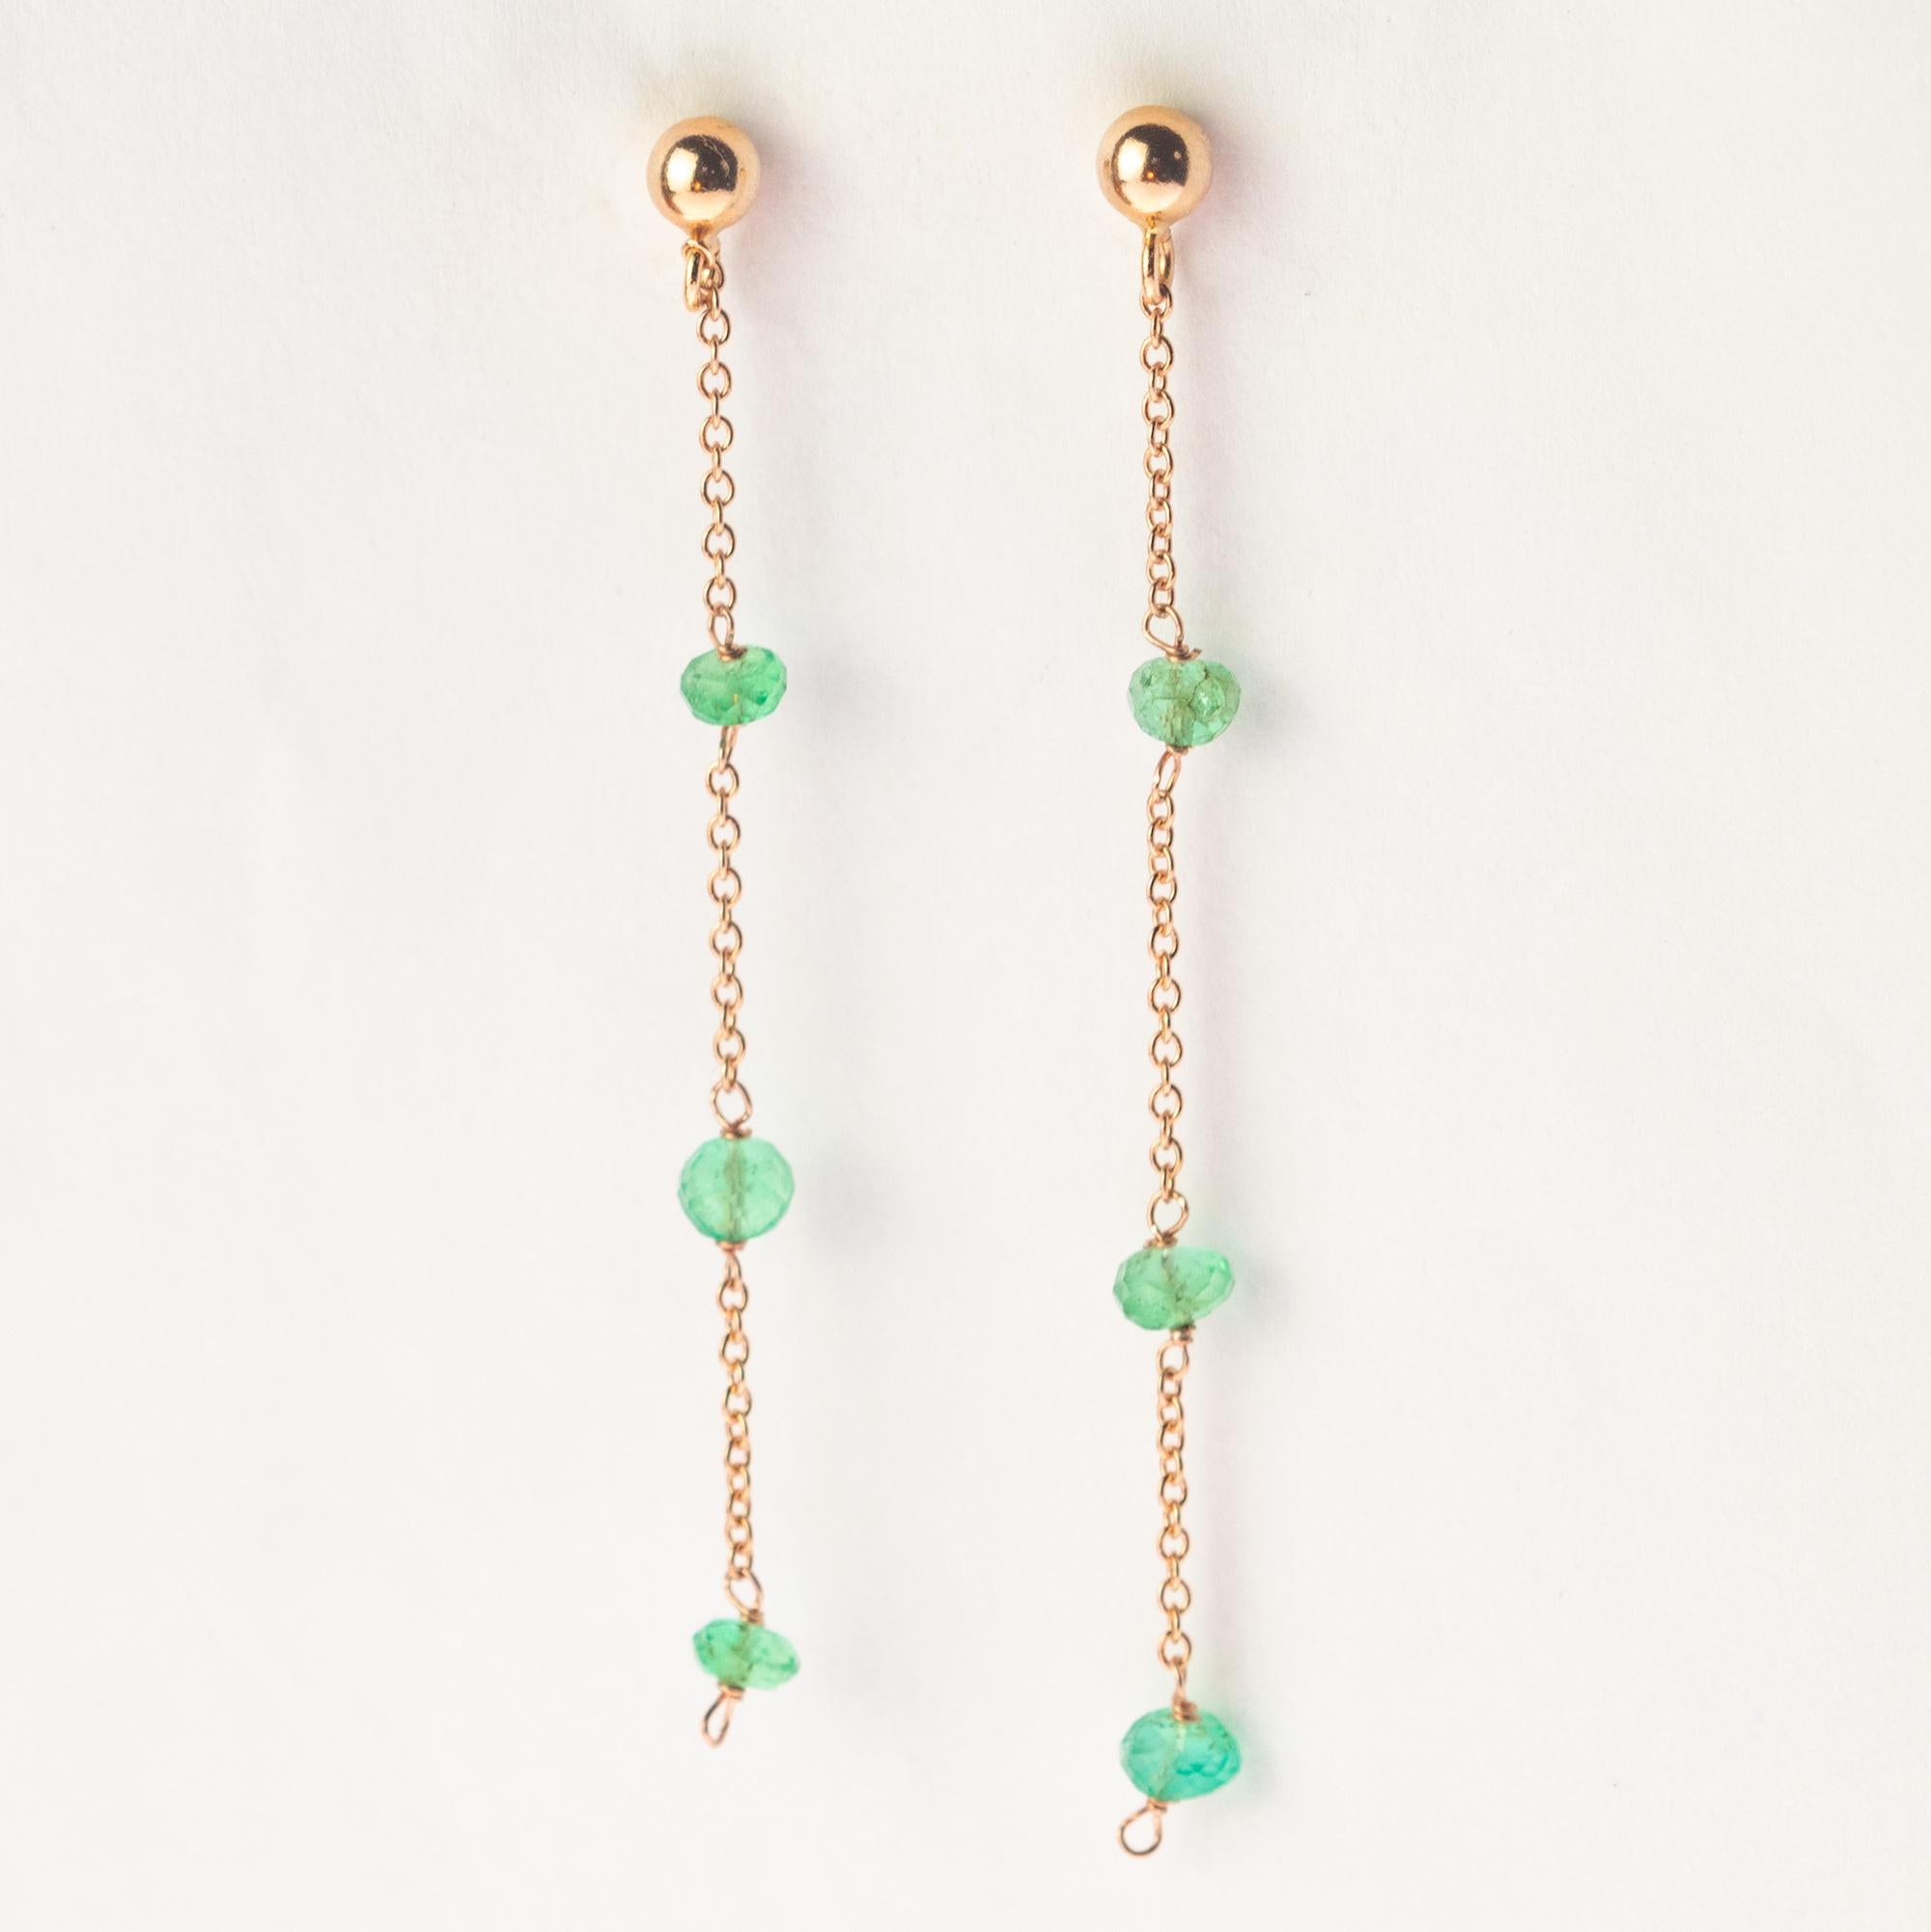 Intini Jewels signature quality on a modern and contemporary design jewel. Stunning earrings with three emerald rondelles embellished with a 18 karat rose / pink gold chain.

An elegant touch of glamour at your fingertips. Let yourself be tempted by